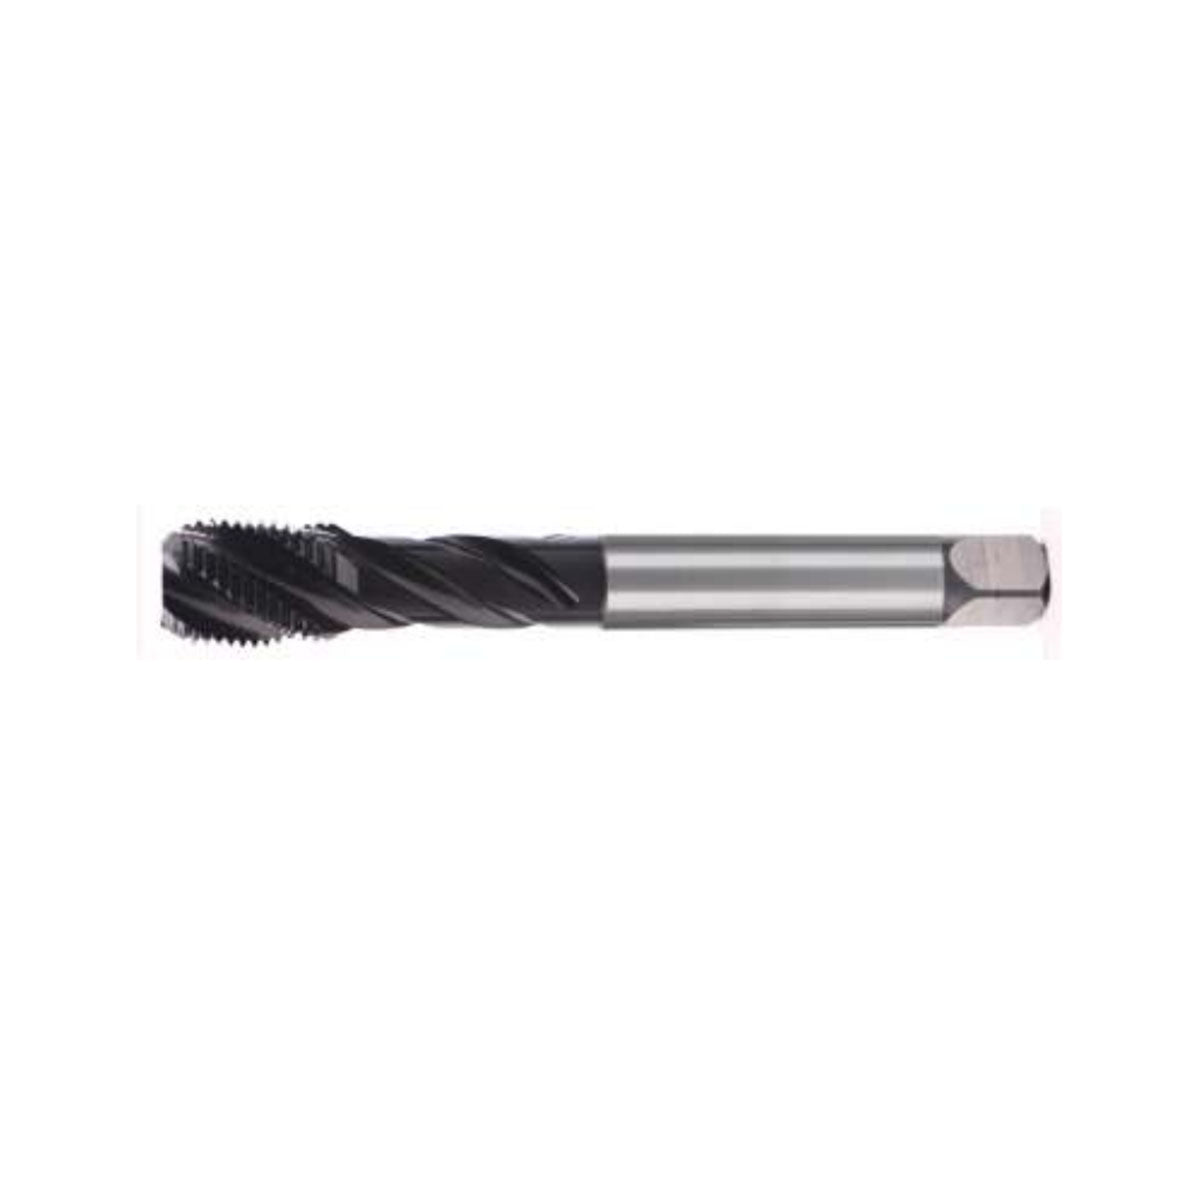 X20-SFT (M4~16×0.7~1) X20S04070  spiarl fluted  taps for stainless steel - Makotools Industrial Supply Tools for Metal Cutting